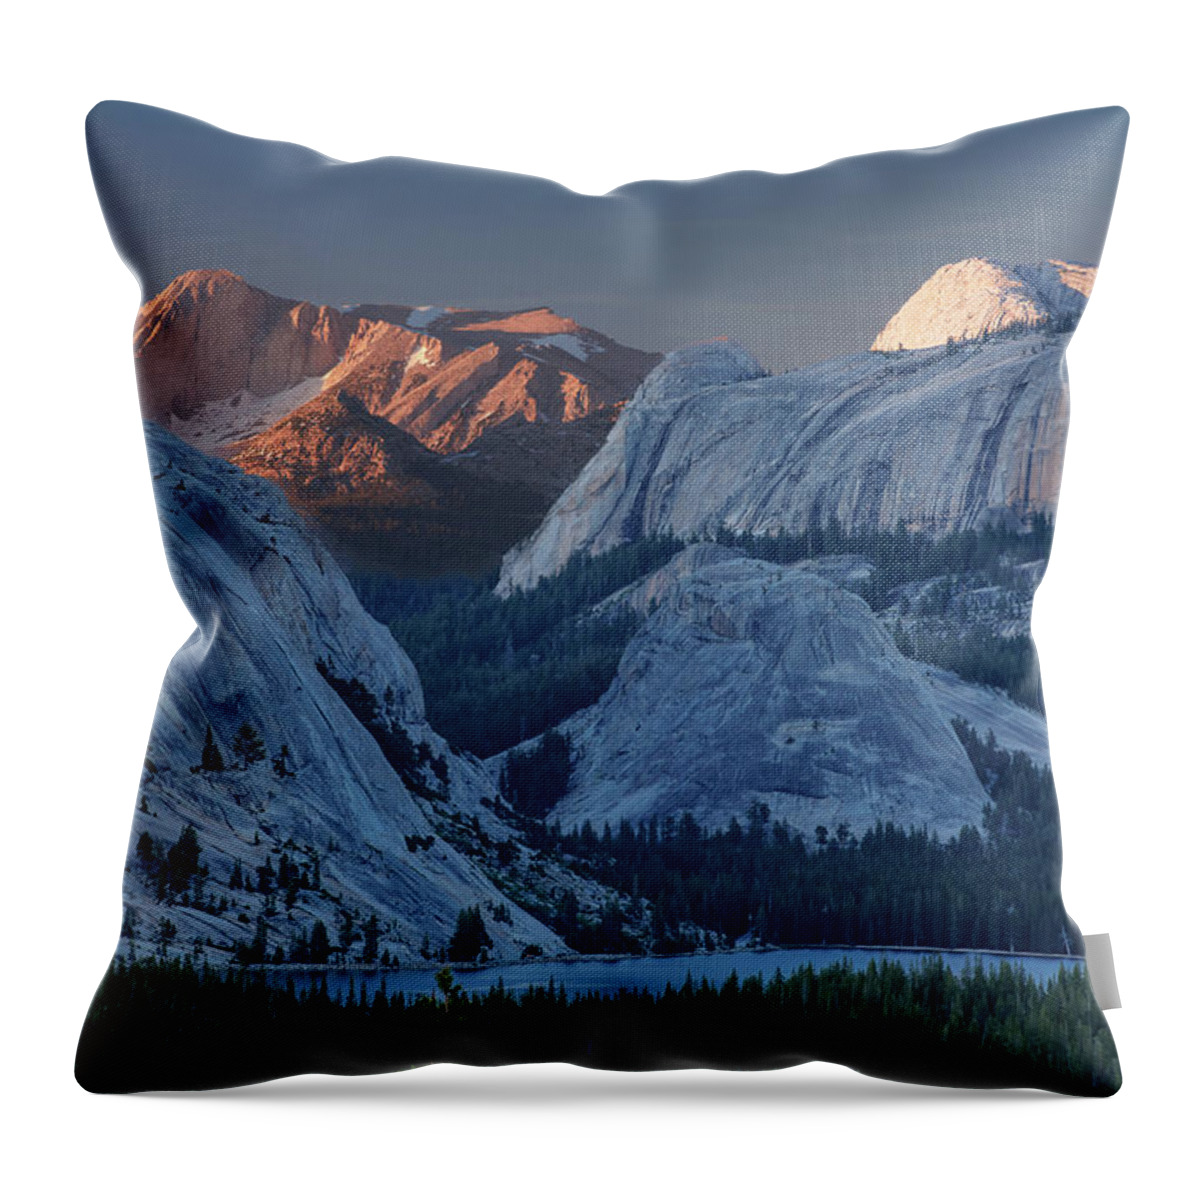 Mount Conness Throw Pillow featuring the photograph Evening Light On Mount Conness by Bill Roberts